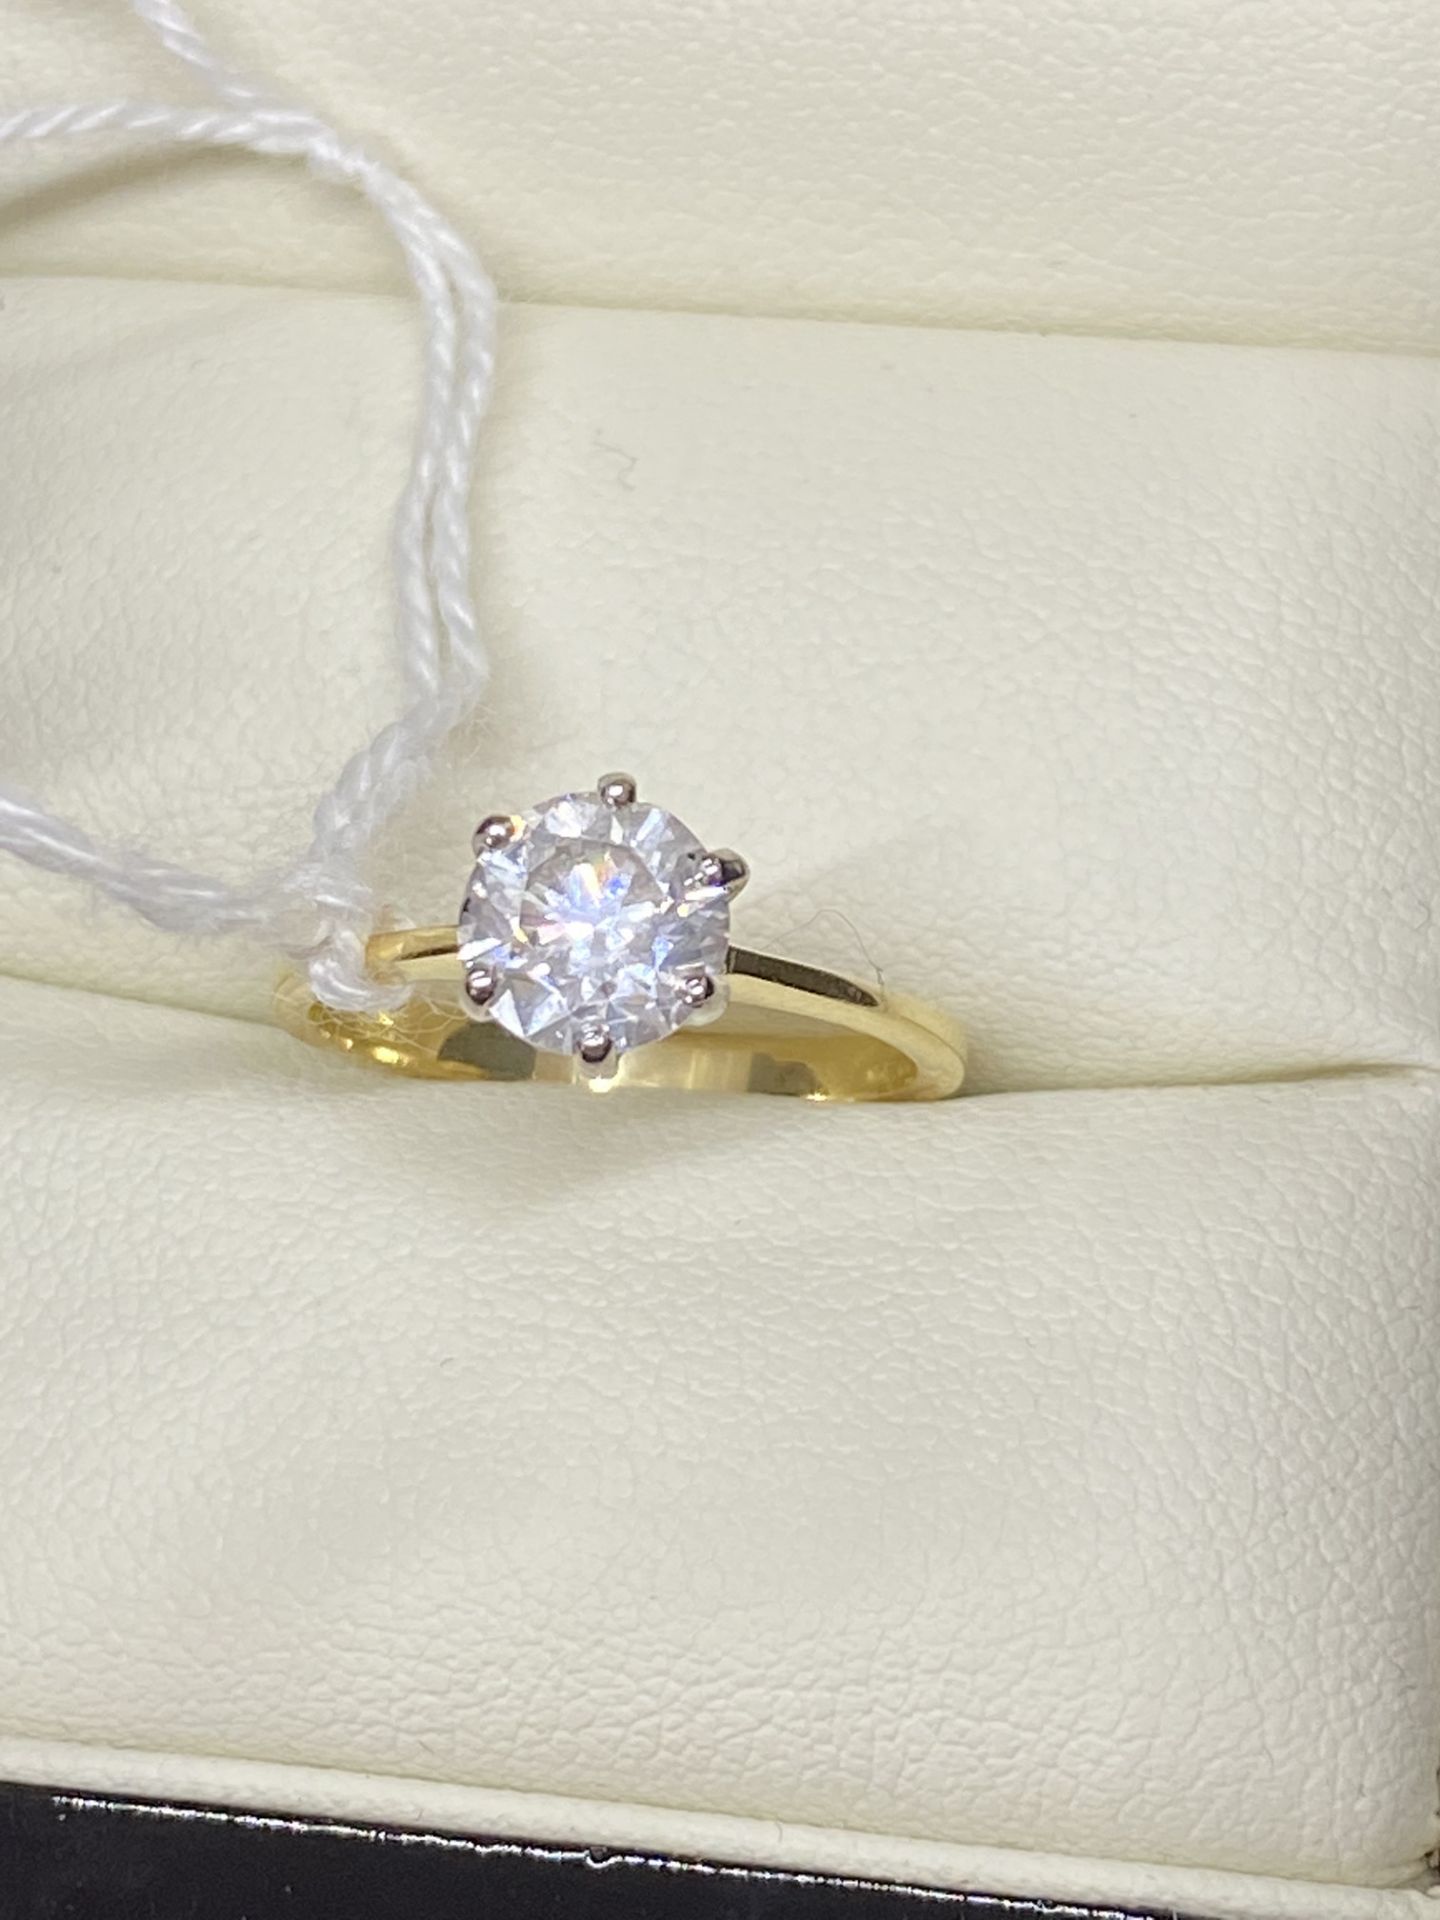 18ct YELLOW GOLD 1.30ct DIAMOND SOLITAIRE RING - Image 2 of 3